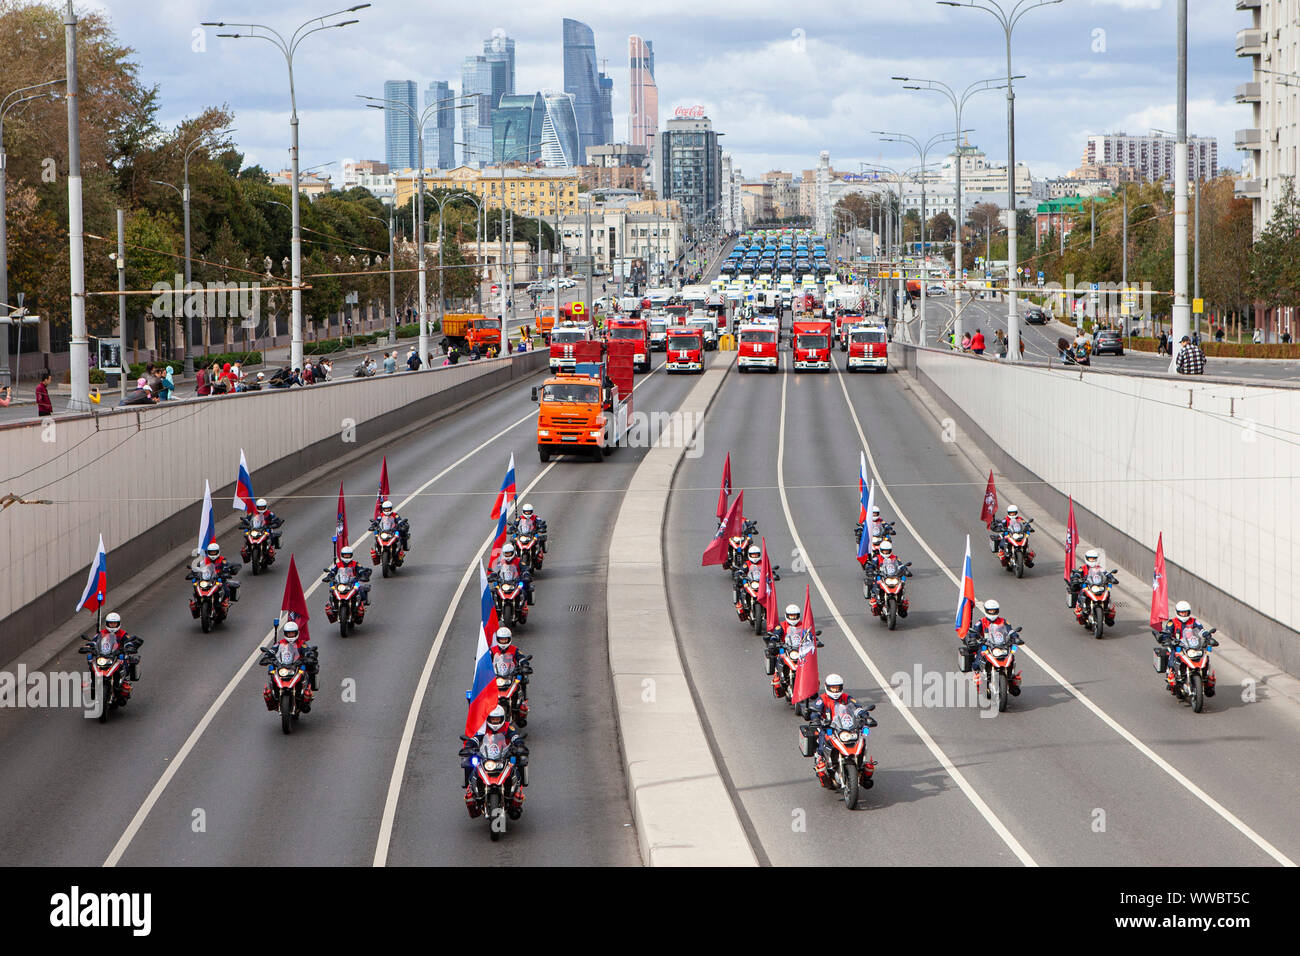 Beijing, Russia. 14th Sep, 2019. Municipal service vehicles take part in a parade in central Moscow, Russia, on Sept. 14, 2019. About 700 vehicles took part in the Municipal Service Vehicle Parade on Saturday. Credit: Alexander Zemlianichenko Jr/Xinhua Stock Photo